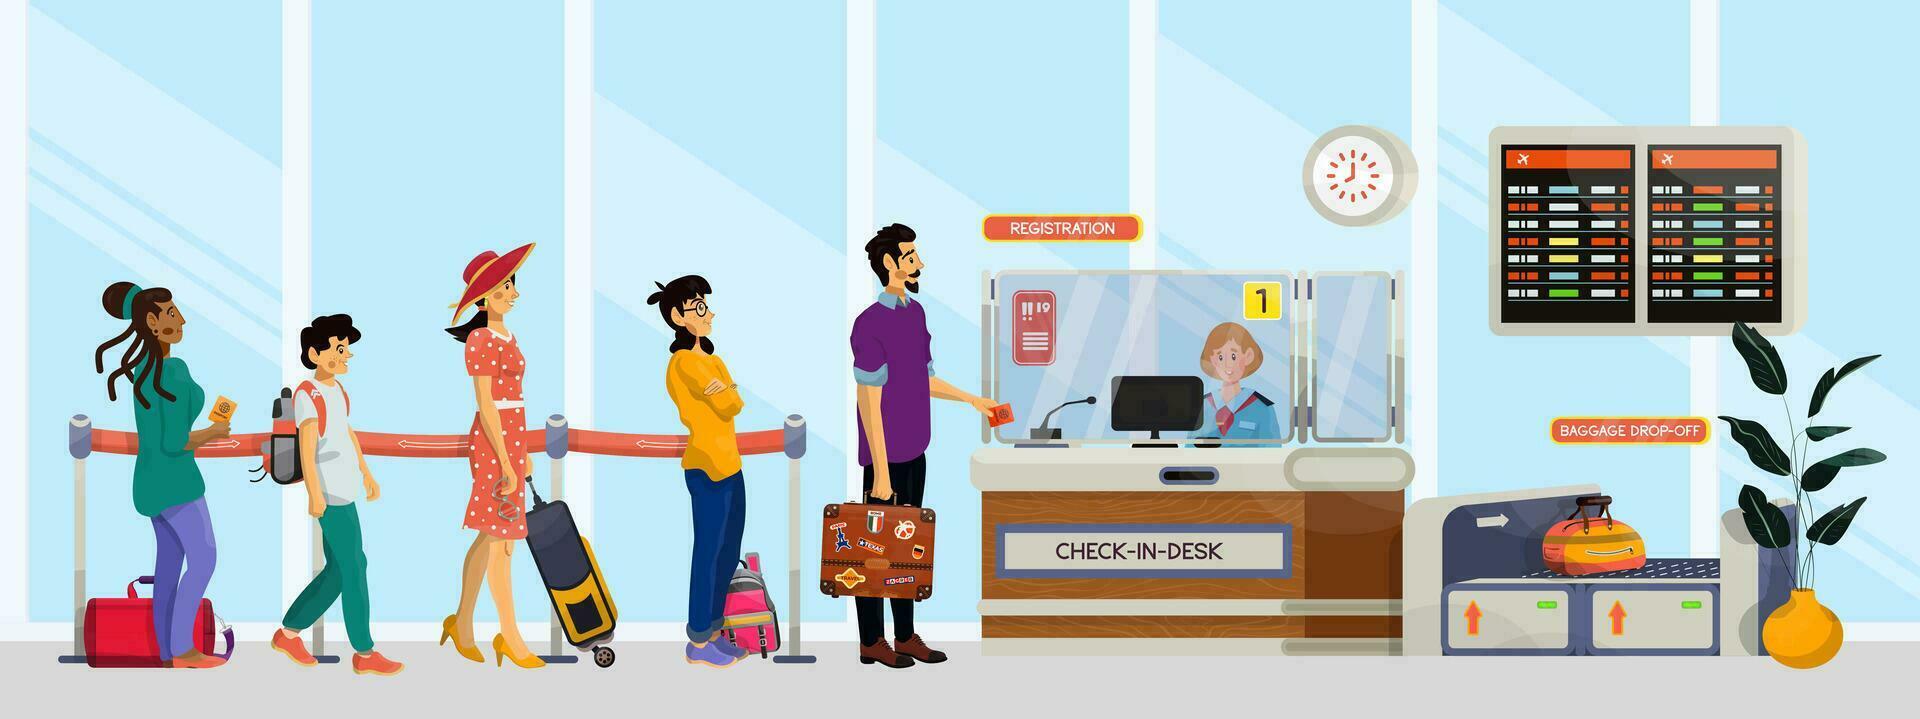 Vector cartoon illustration of queue in airport or railway station. Family concept.